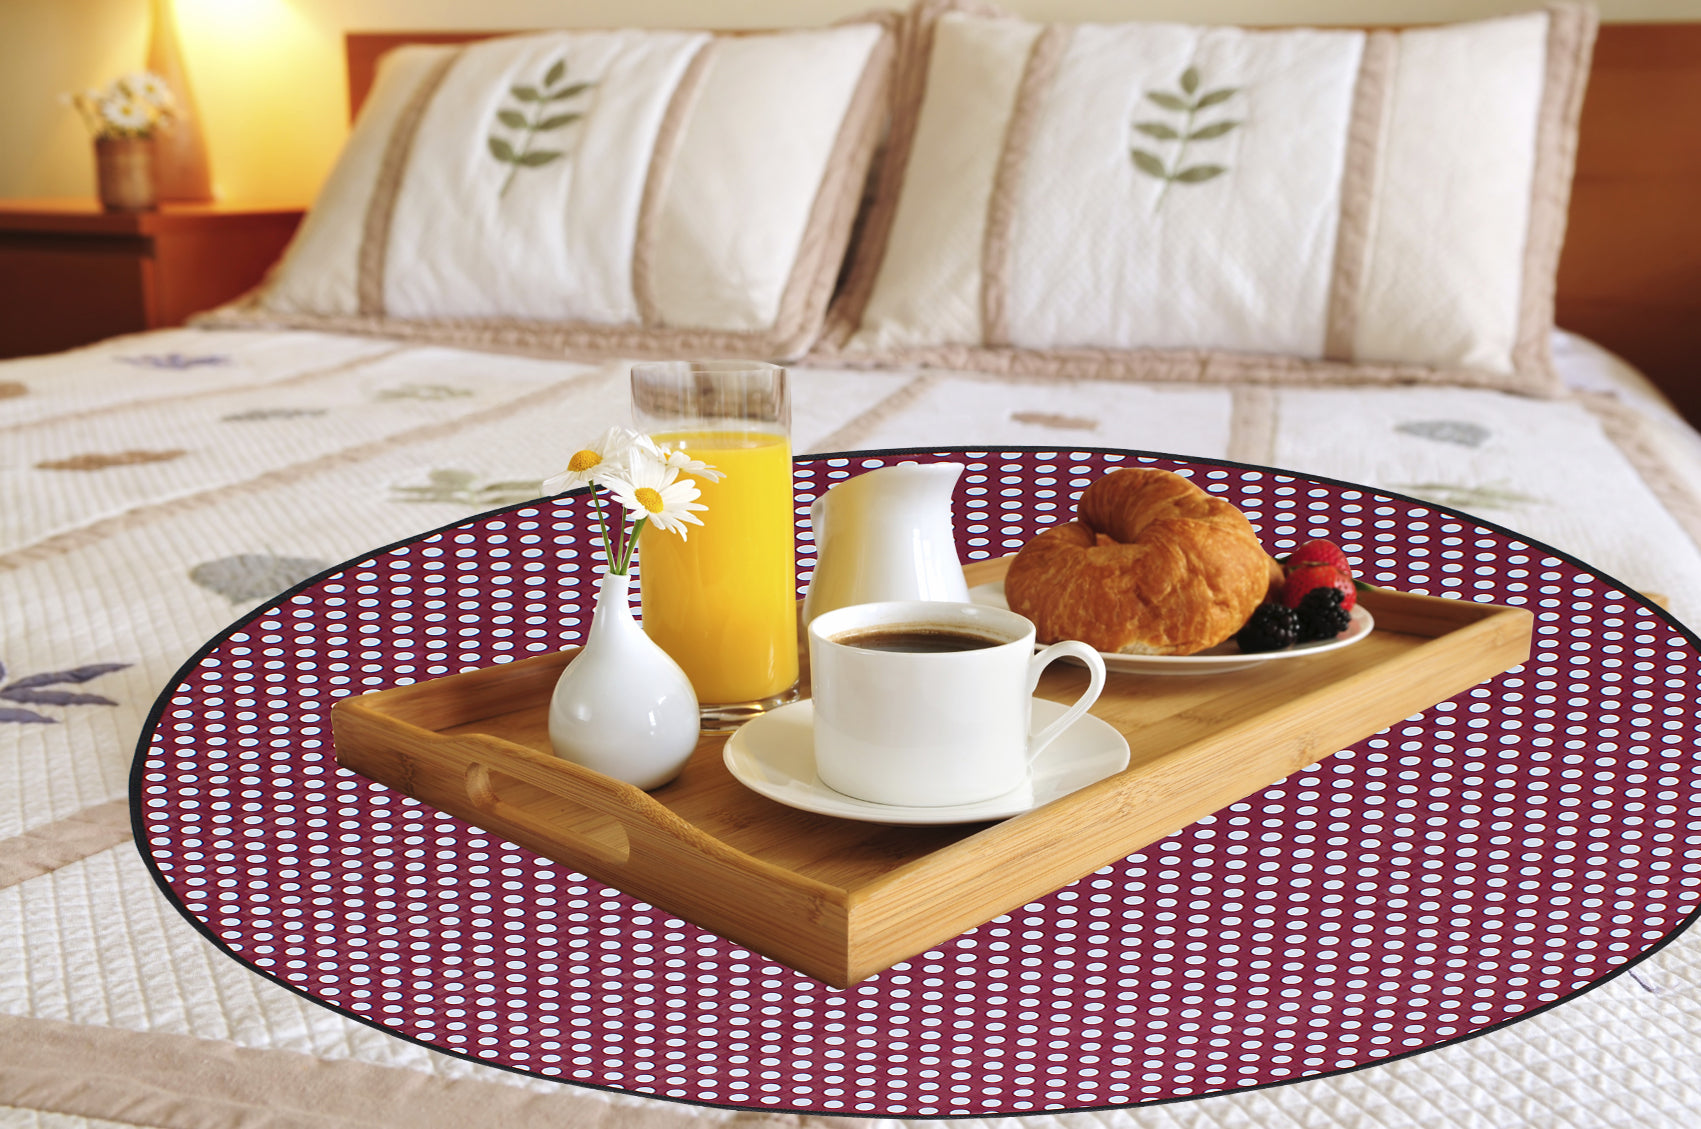 Waterproof & Oil Proof Bed Server Circle Mat, SA46 - Dream Care Furnishings Private Limited